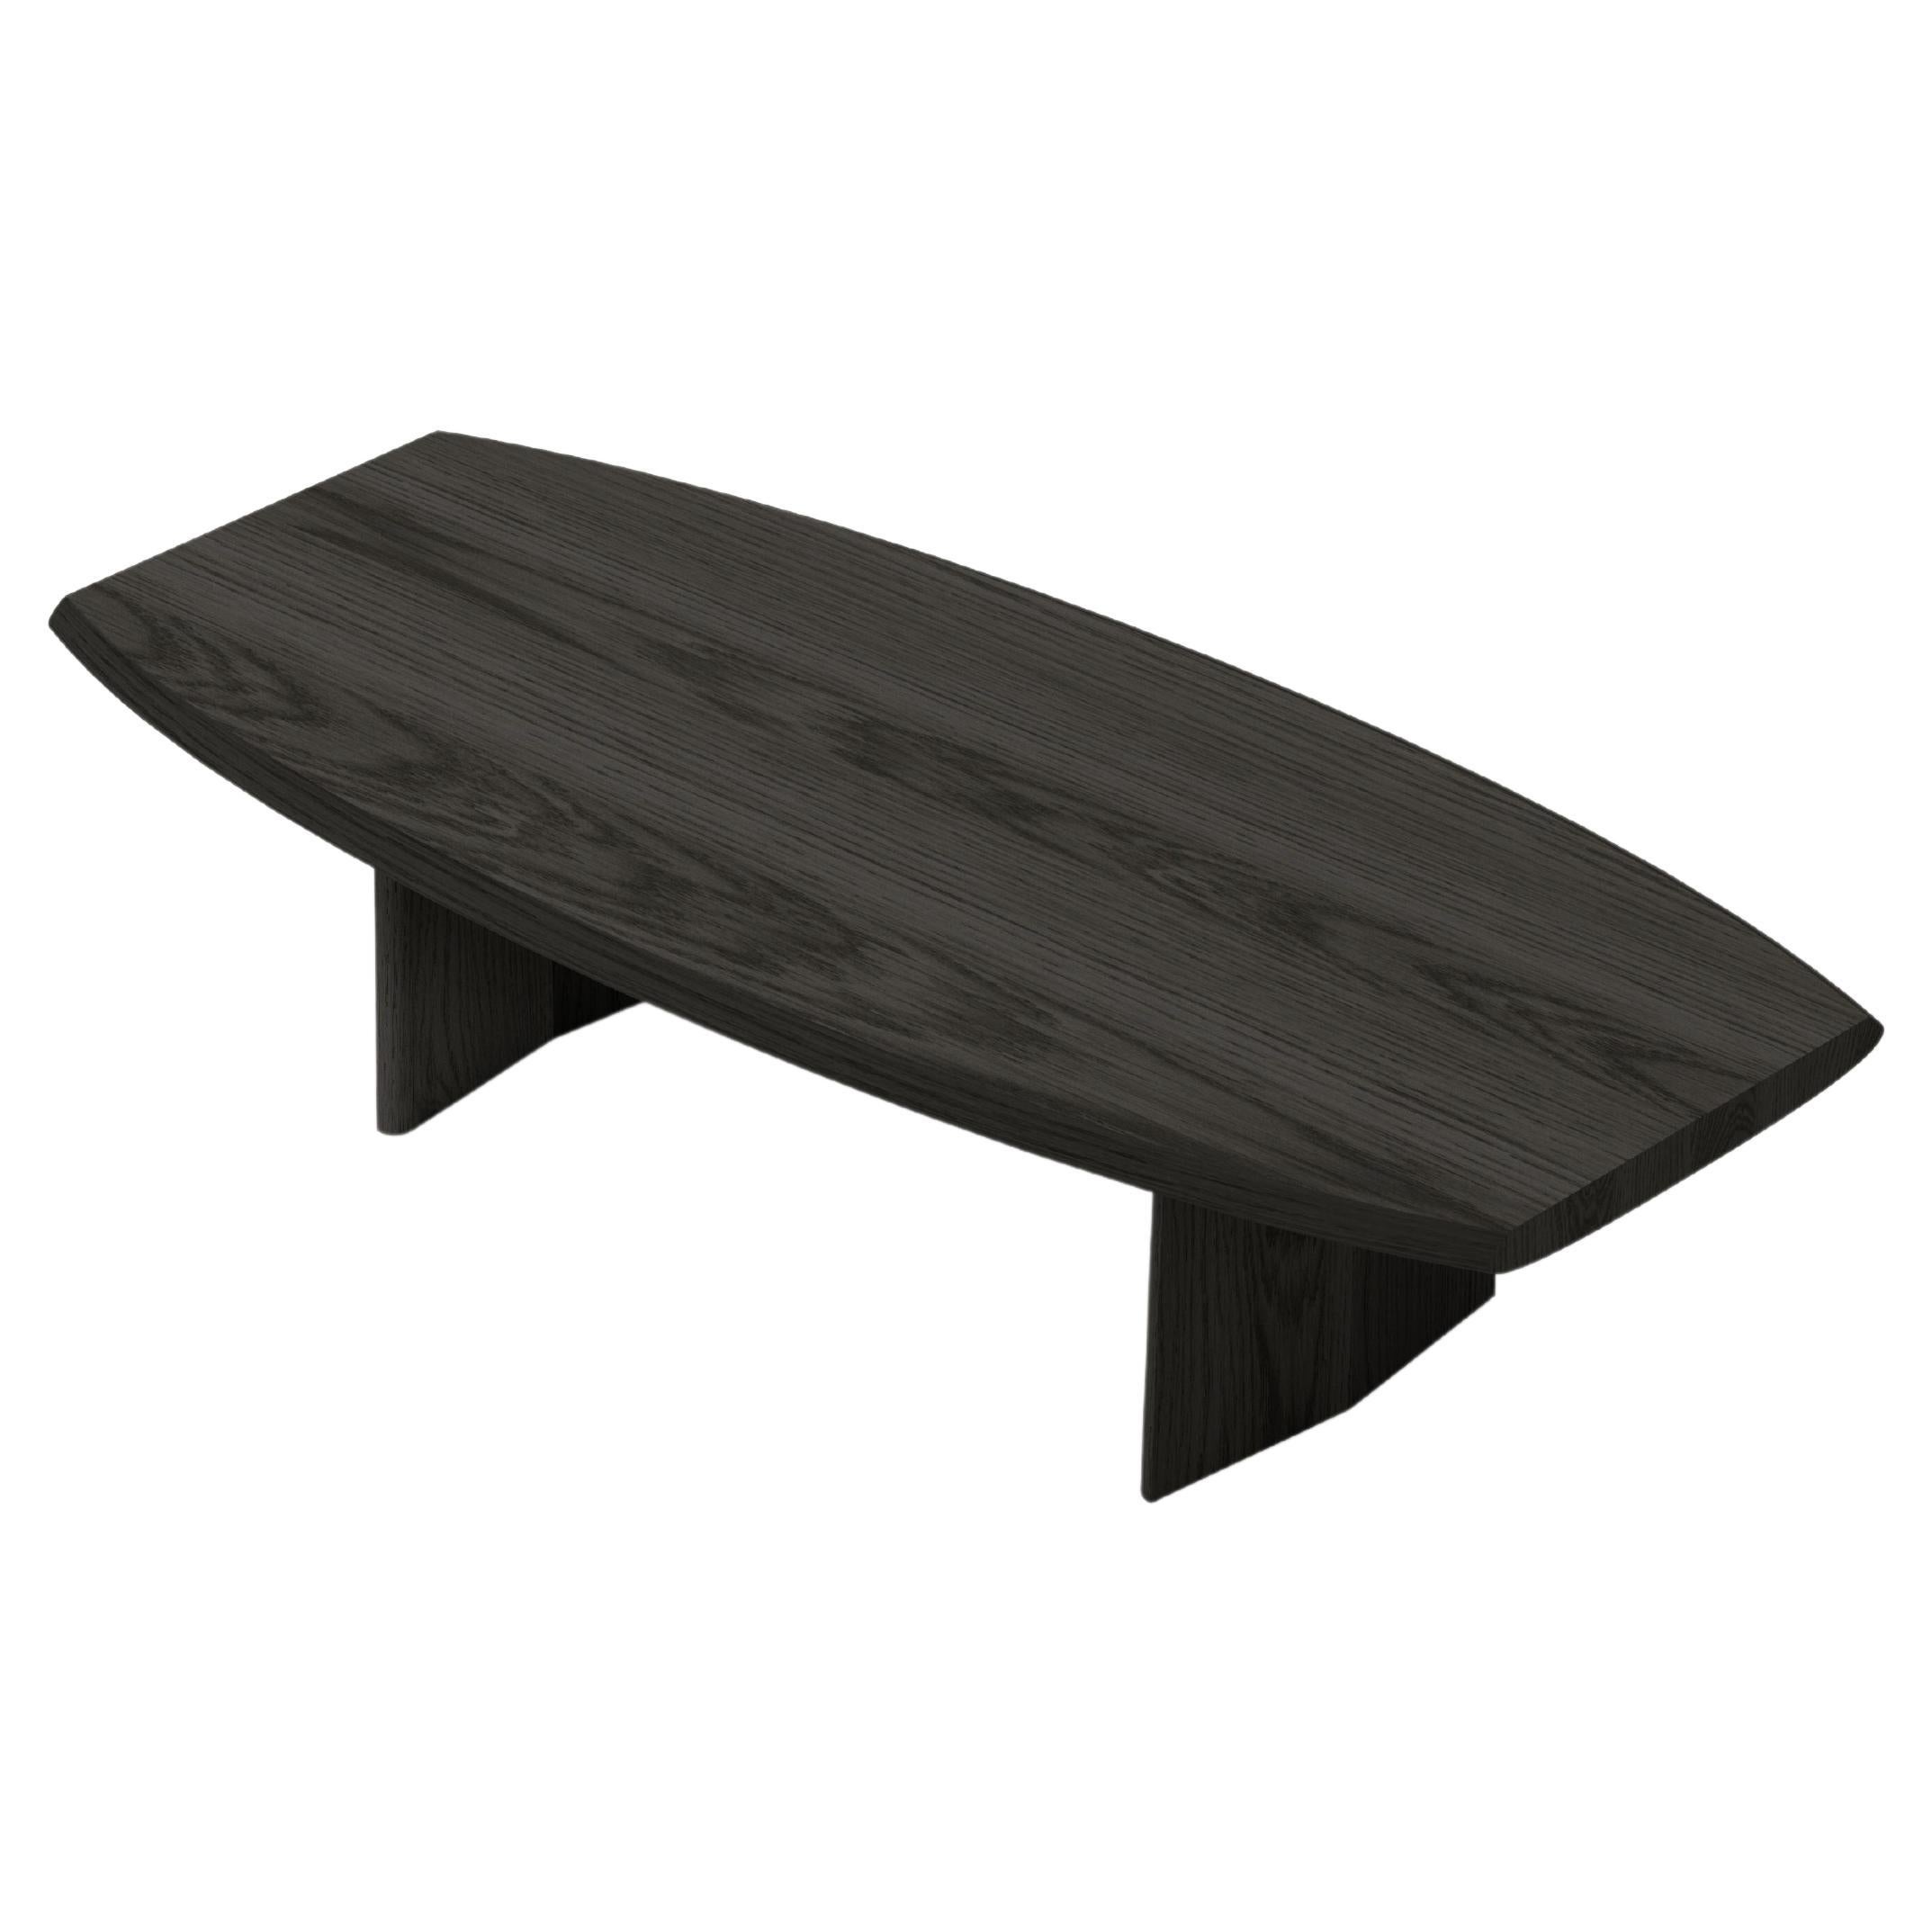 Peana Coffee Table, Bench in Black Tinted Solid Wood Finish by Joel Escalona For Sale